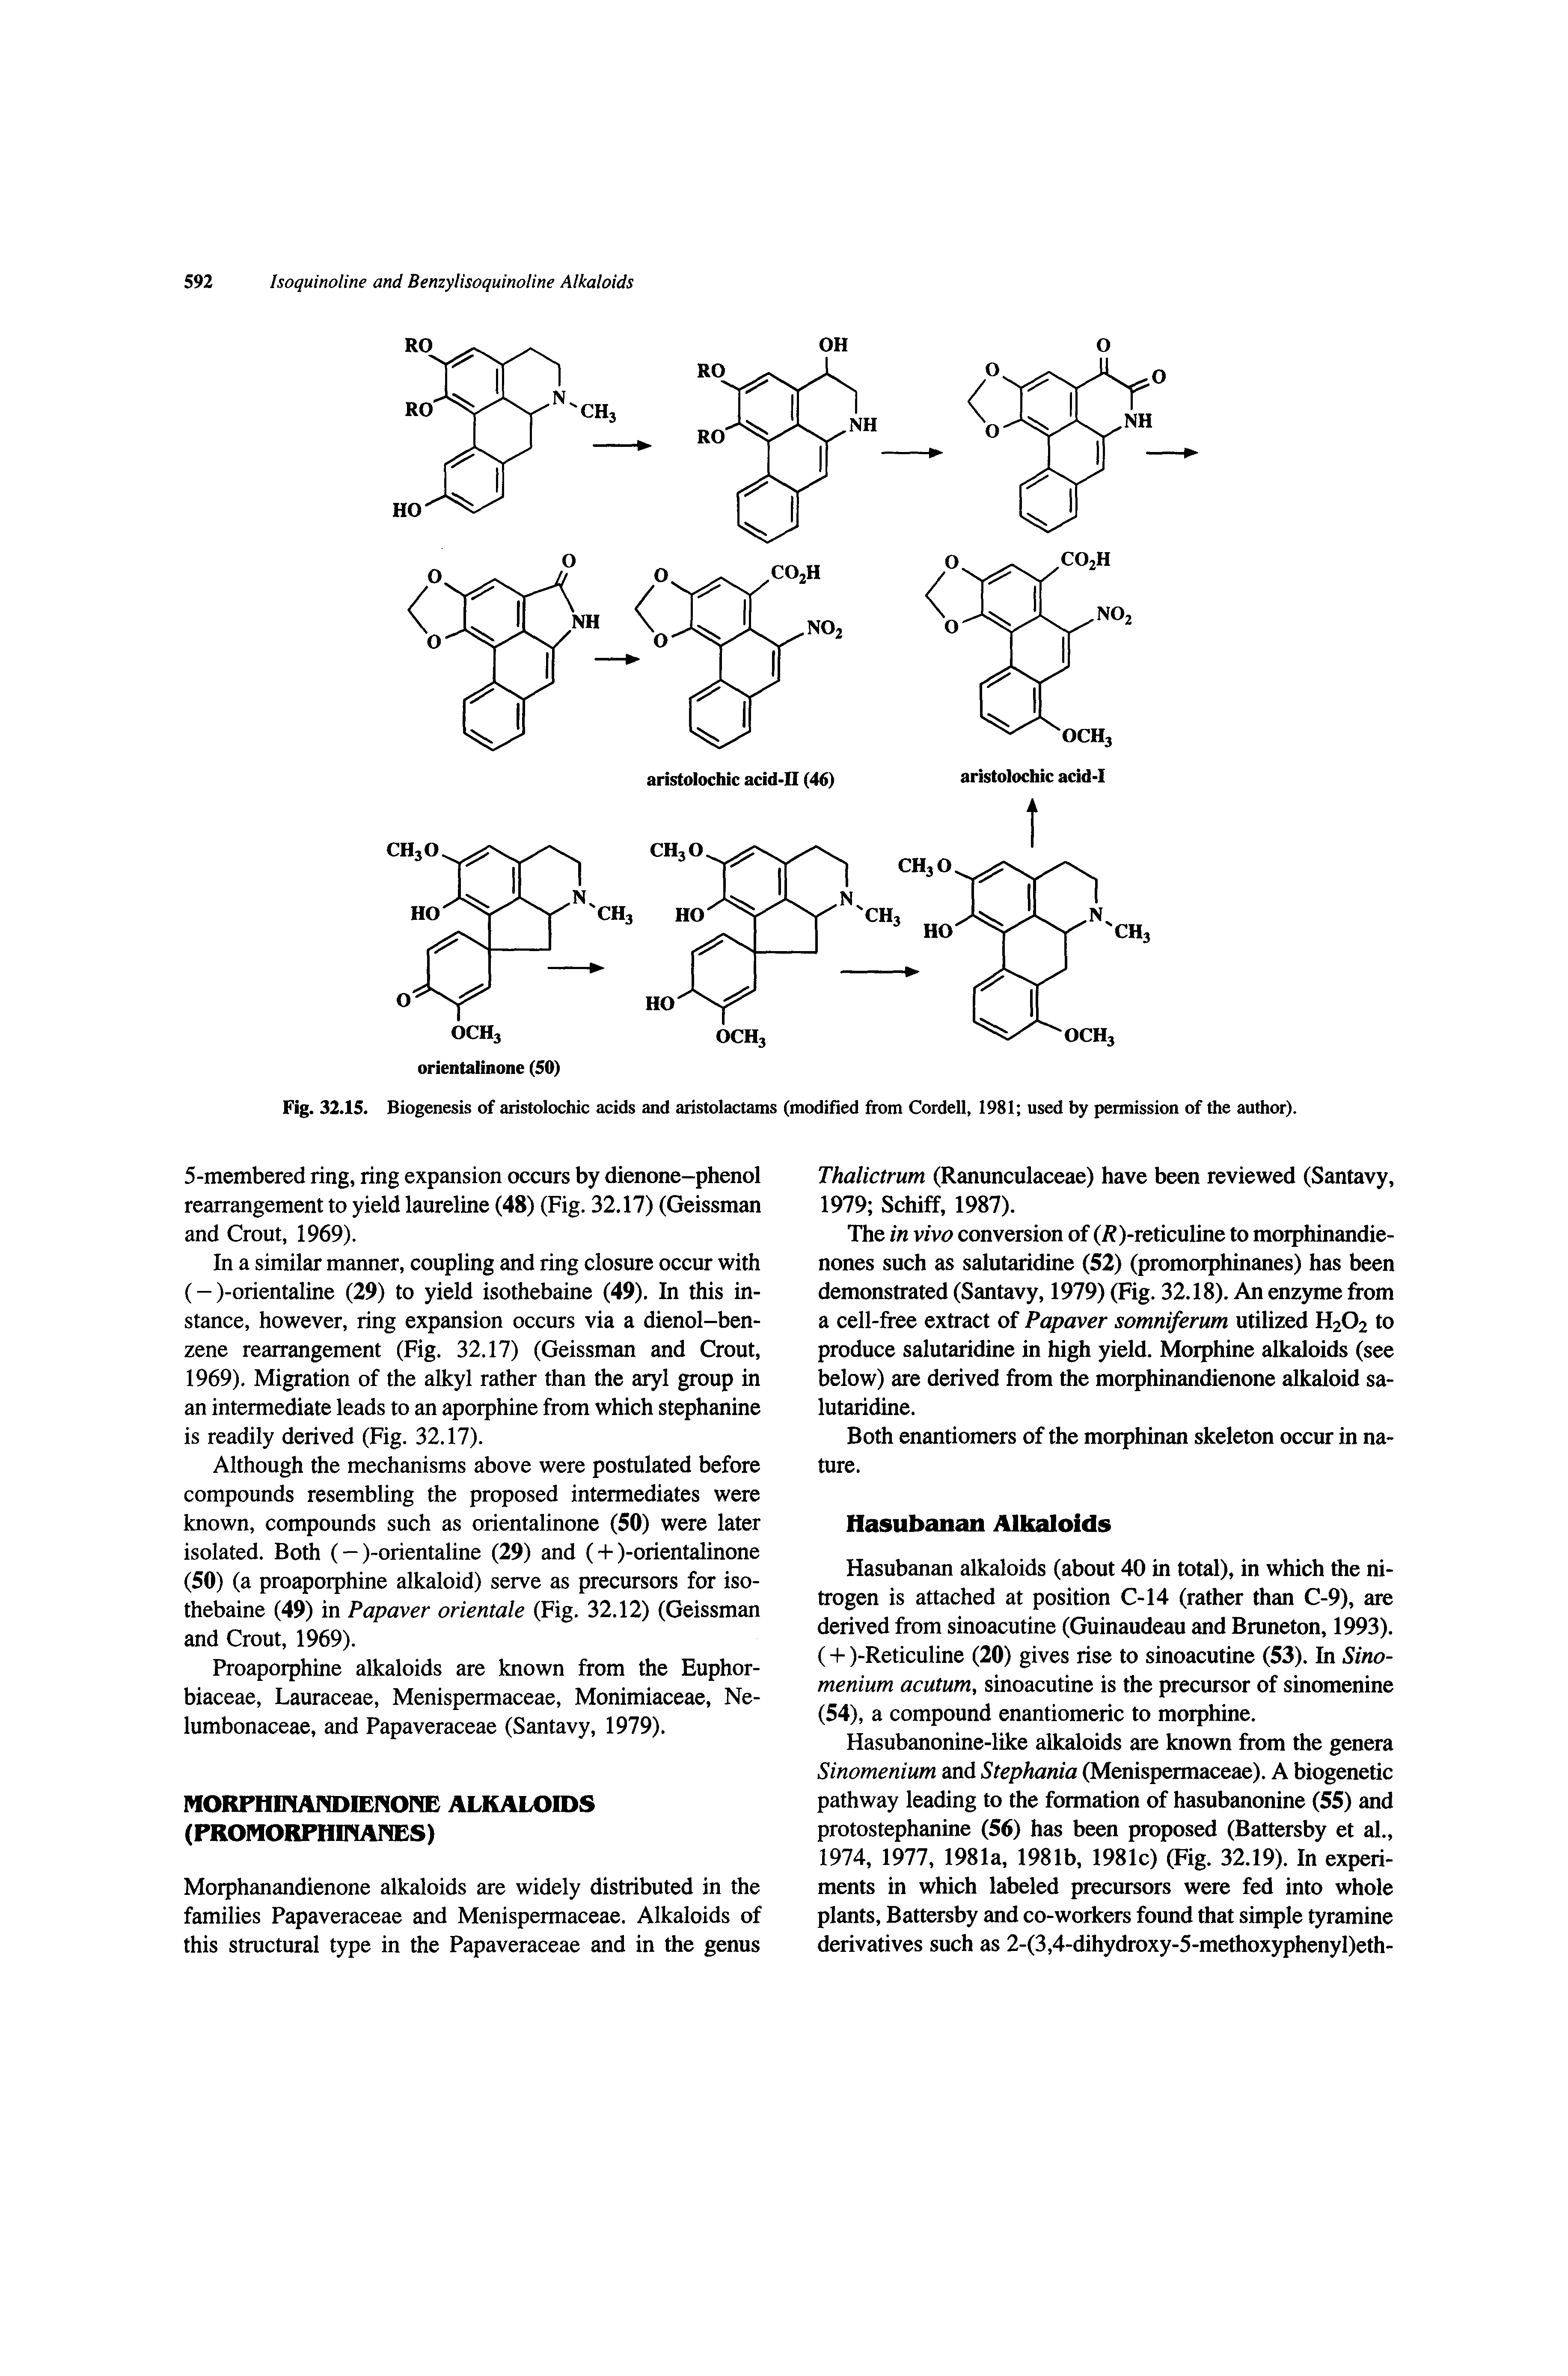 Fig. 32.15. Biogenesis of aristolochic acids and aristolactams (modified from Cordell, 1981 used by permission of the author).